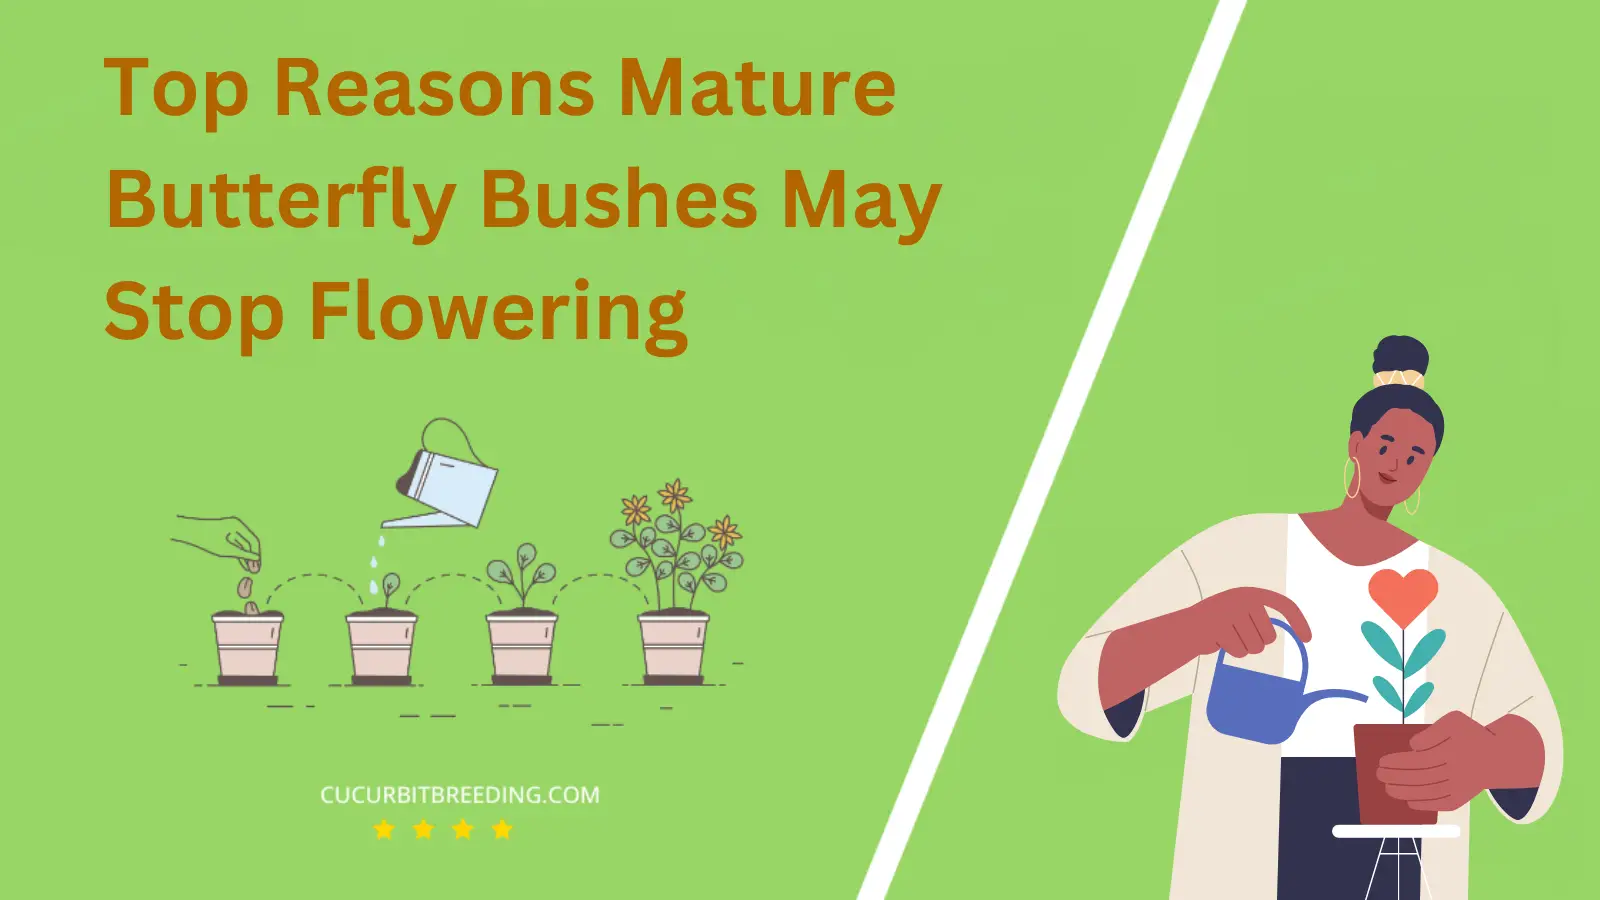 Top Reasons Mature Butterfly Bushes May Stop Flowering